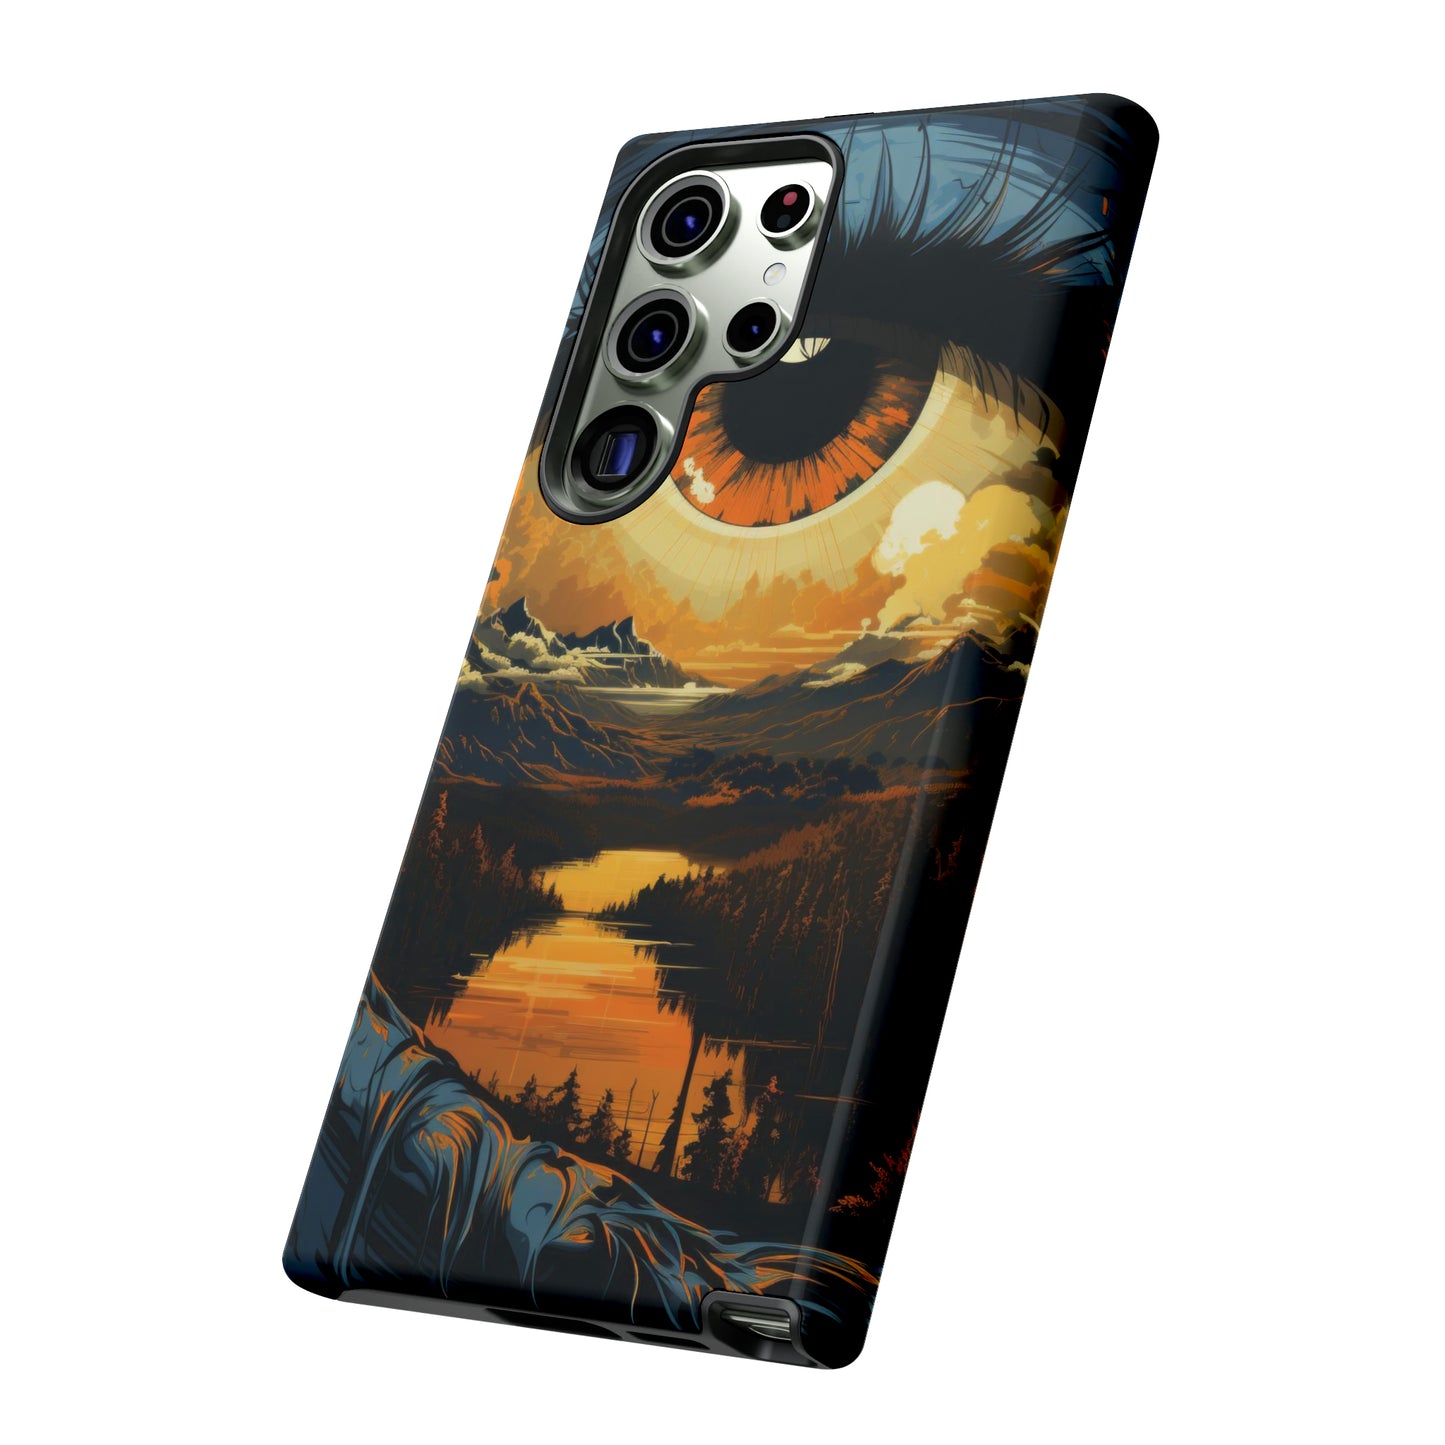 Eyescape: Surreal Valley River Gaze Phone Case for iPhone, Samsung, Pixel